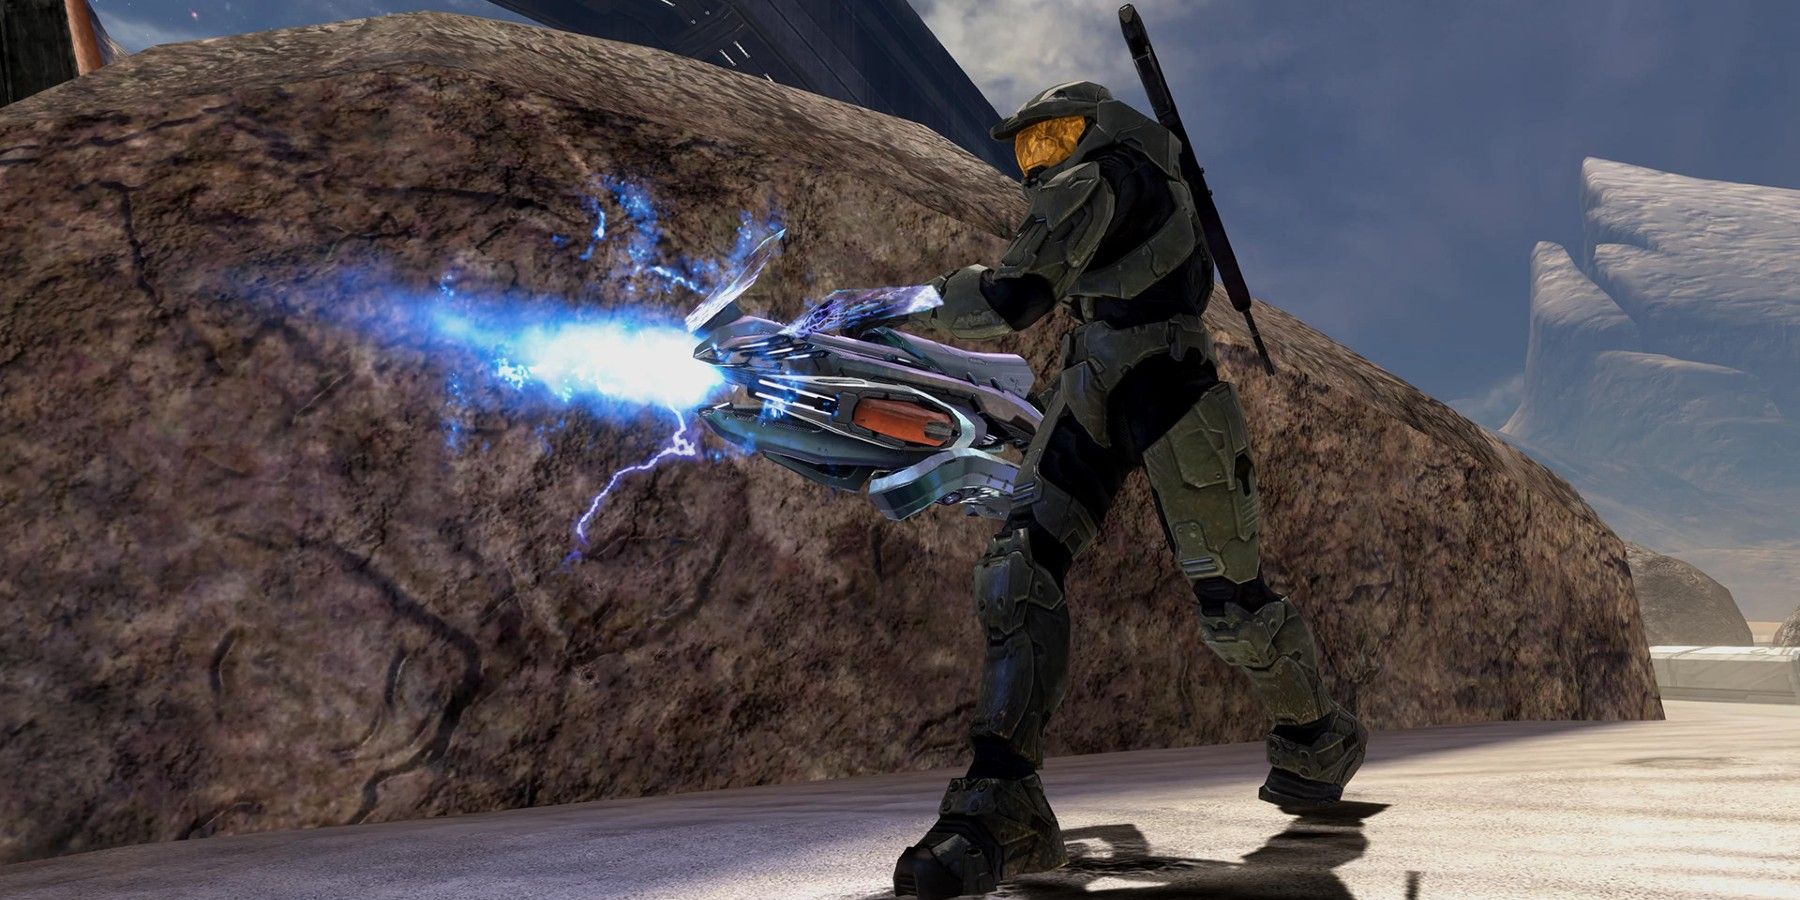 Halo 3 Player Gives Eulogy to Game in Final Capture the Flag Match